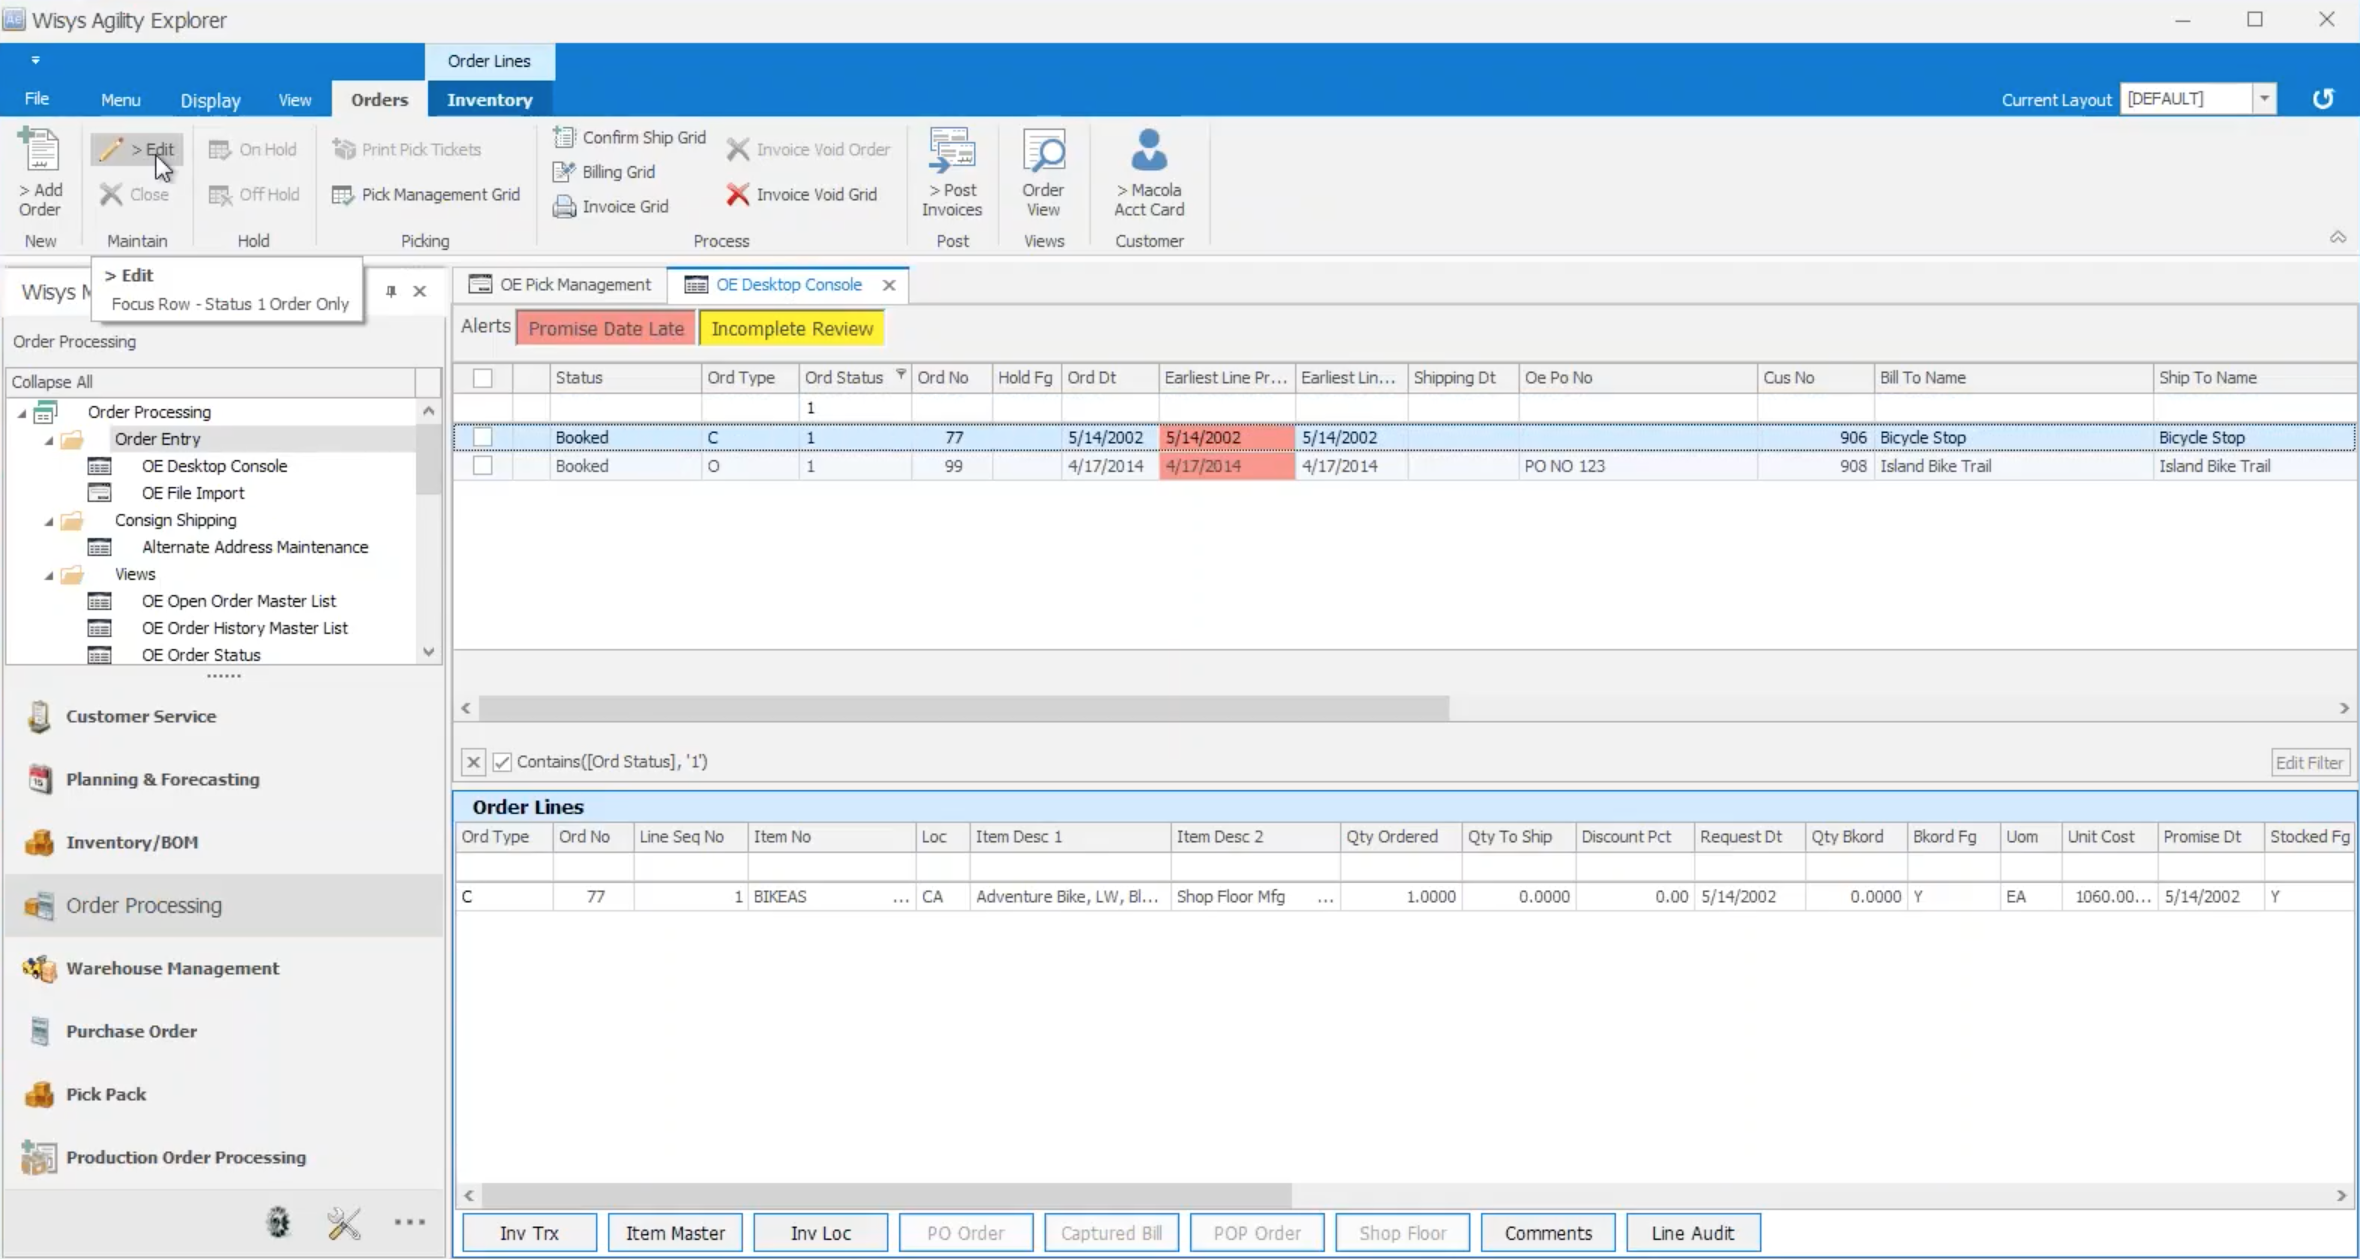 New Grid Button on/off Logic in WiSys Agility Web Explorer